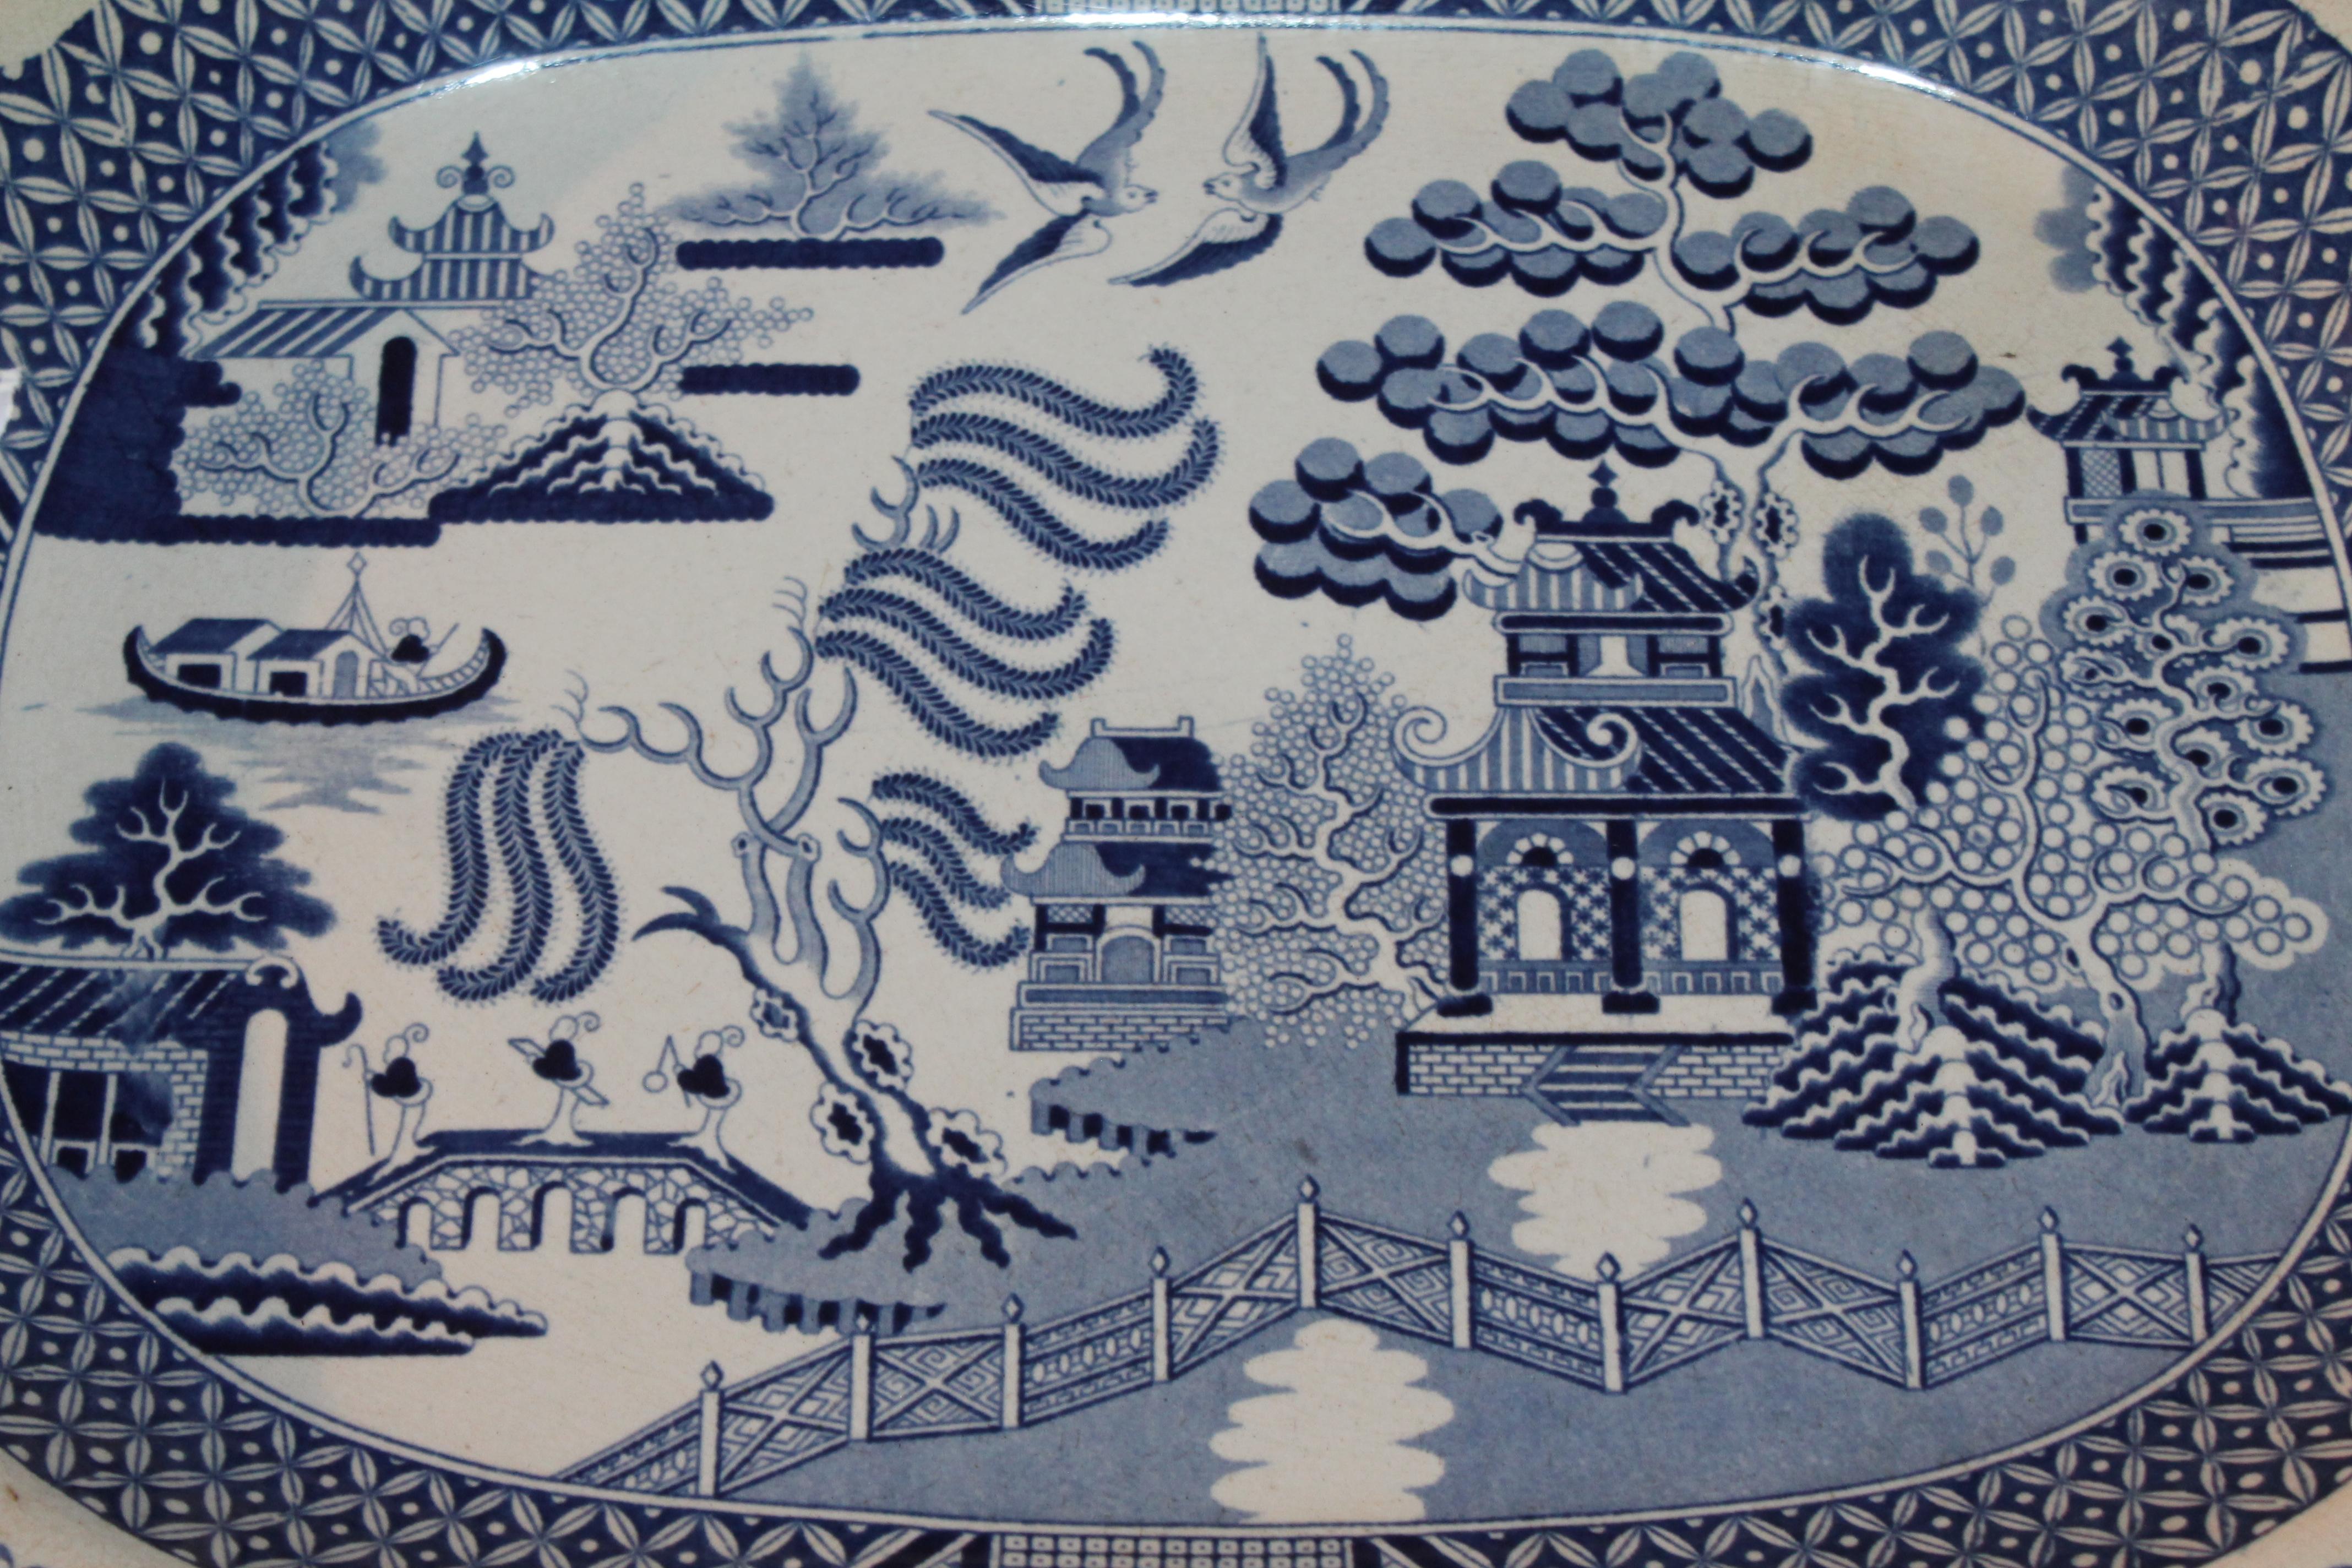 This 19th century large blue willow serving platter is signed Staffordshire, England. The condition is in mint condition.